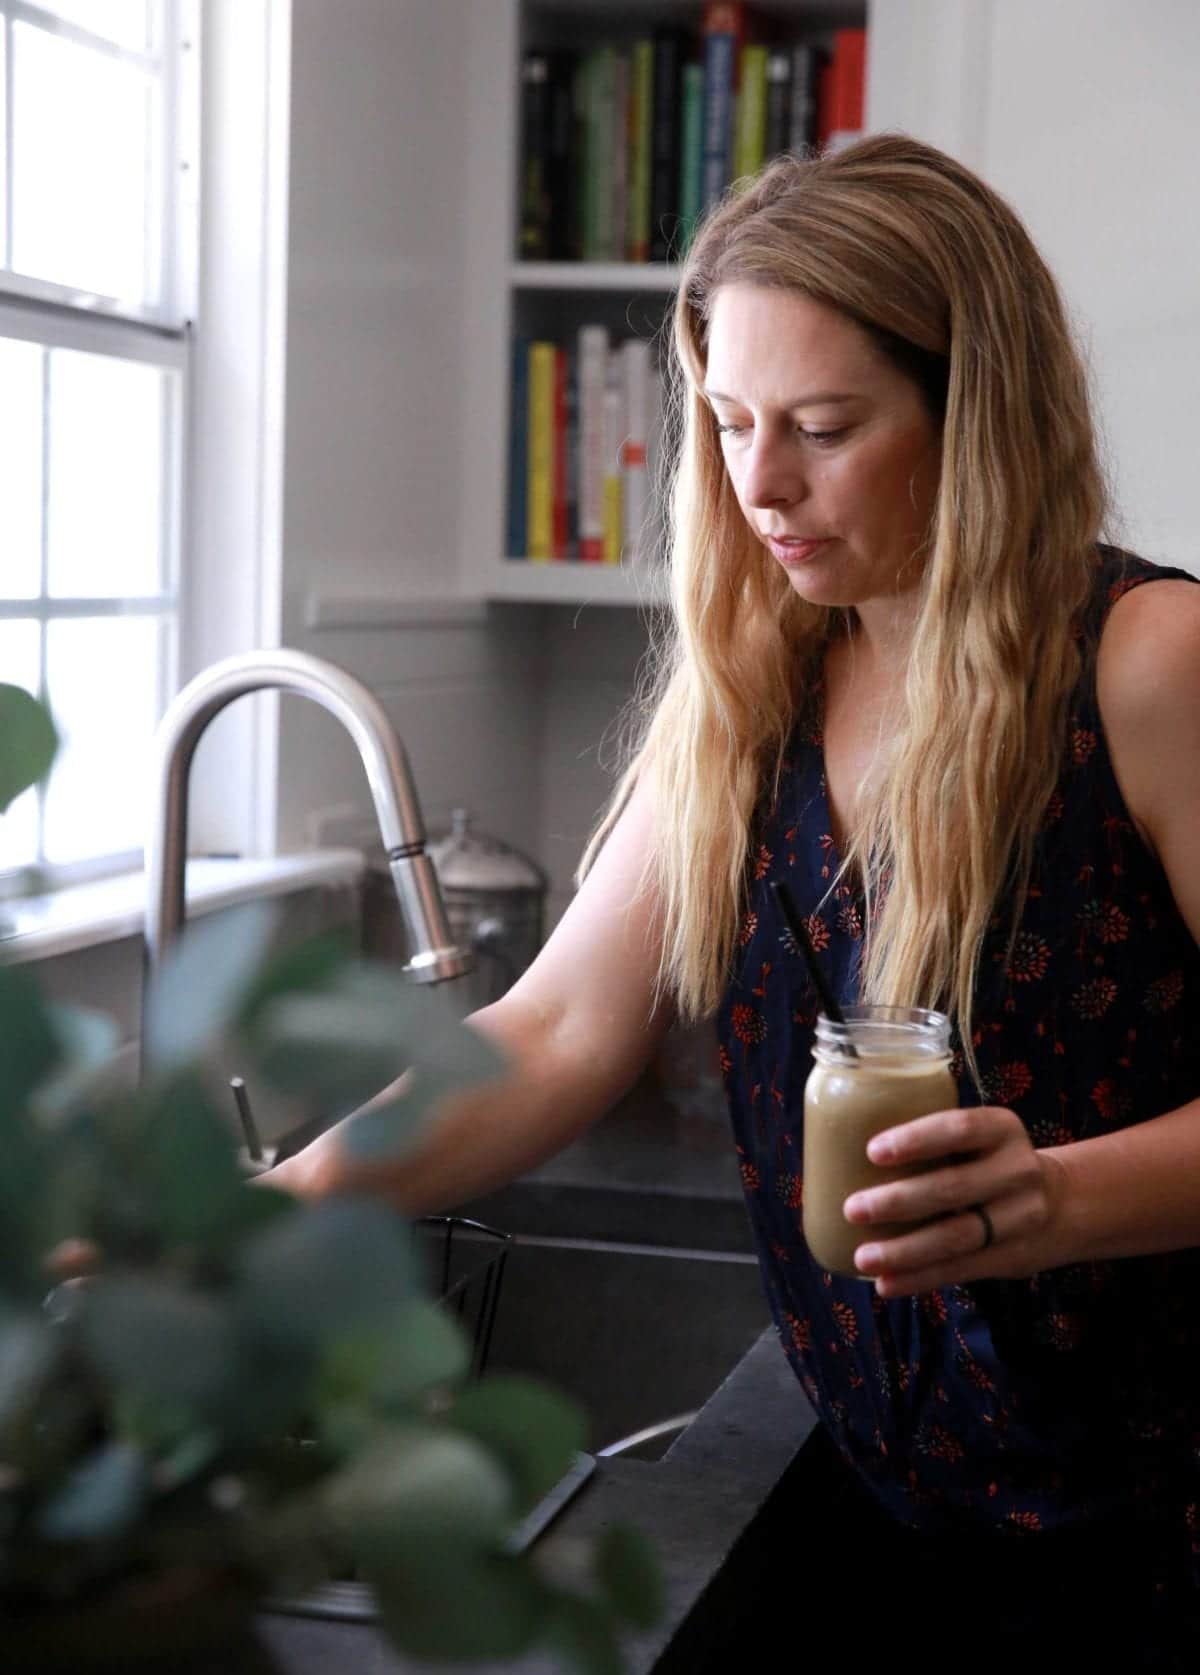 white female standing over a kitchen sink, holding a chocolate smoothie in a glass jar with a black straw.